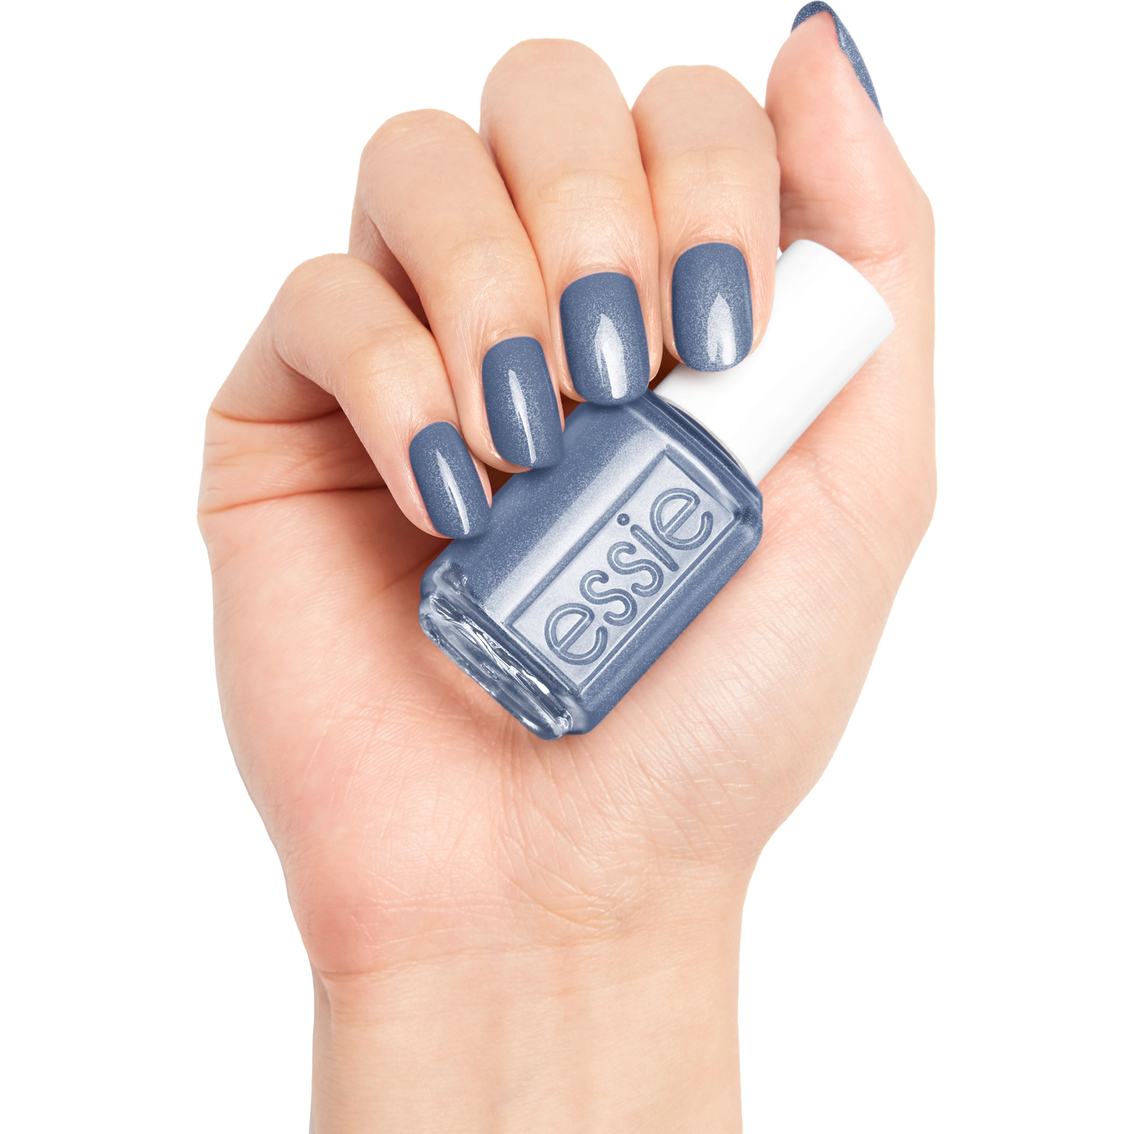 Essie Nail Polish From A To Zzz - Image 5 of 8